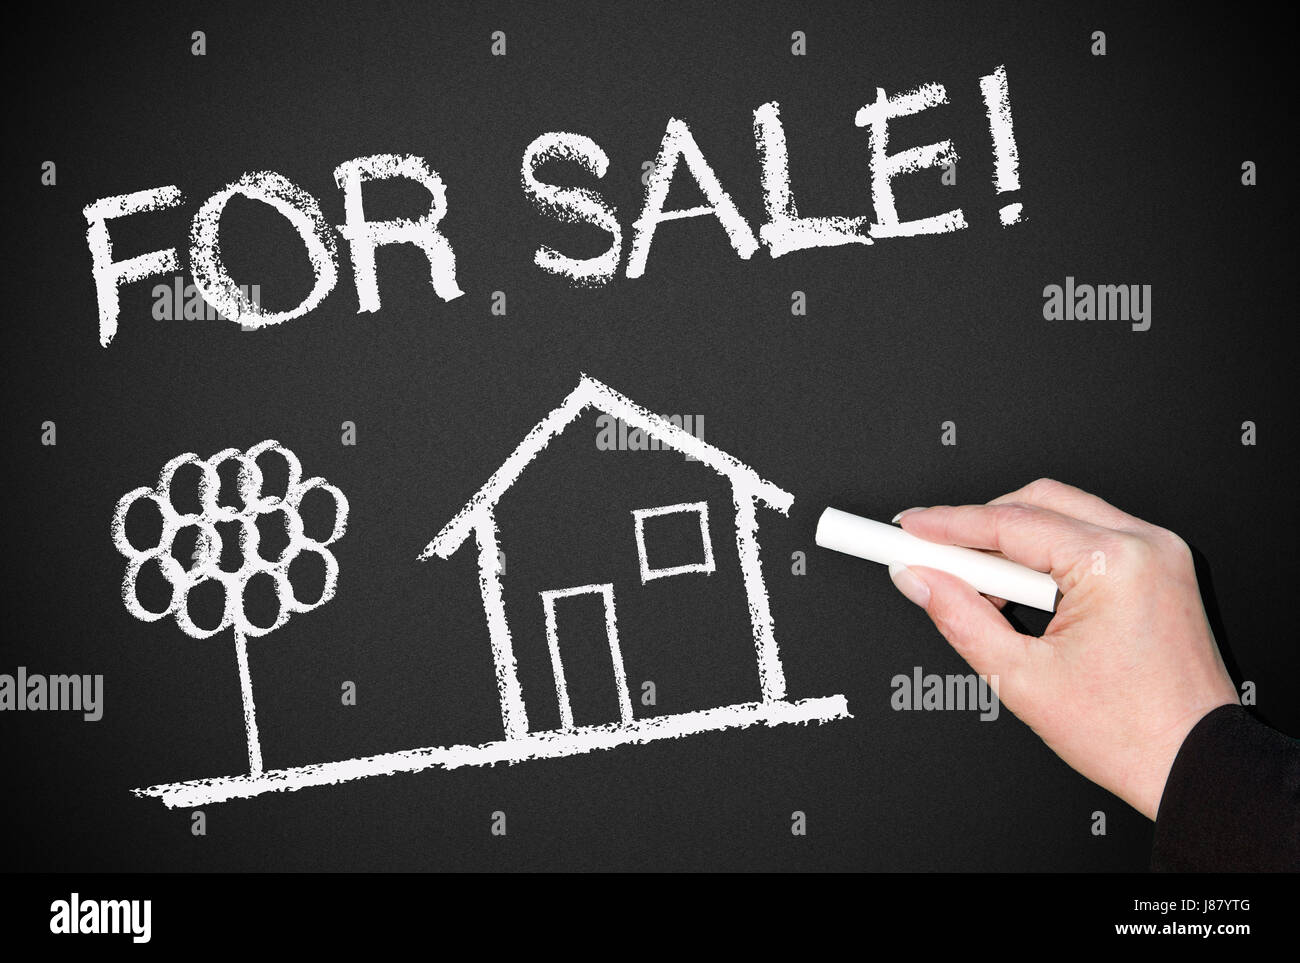 for sale! - house for sale Stock Photo